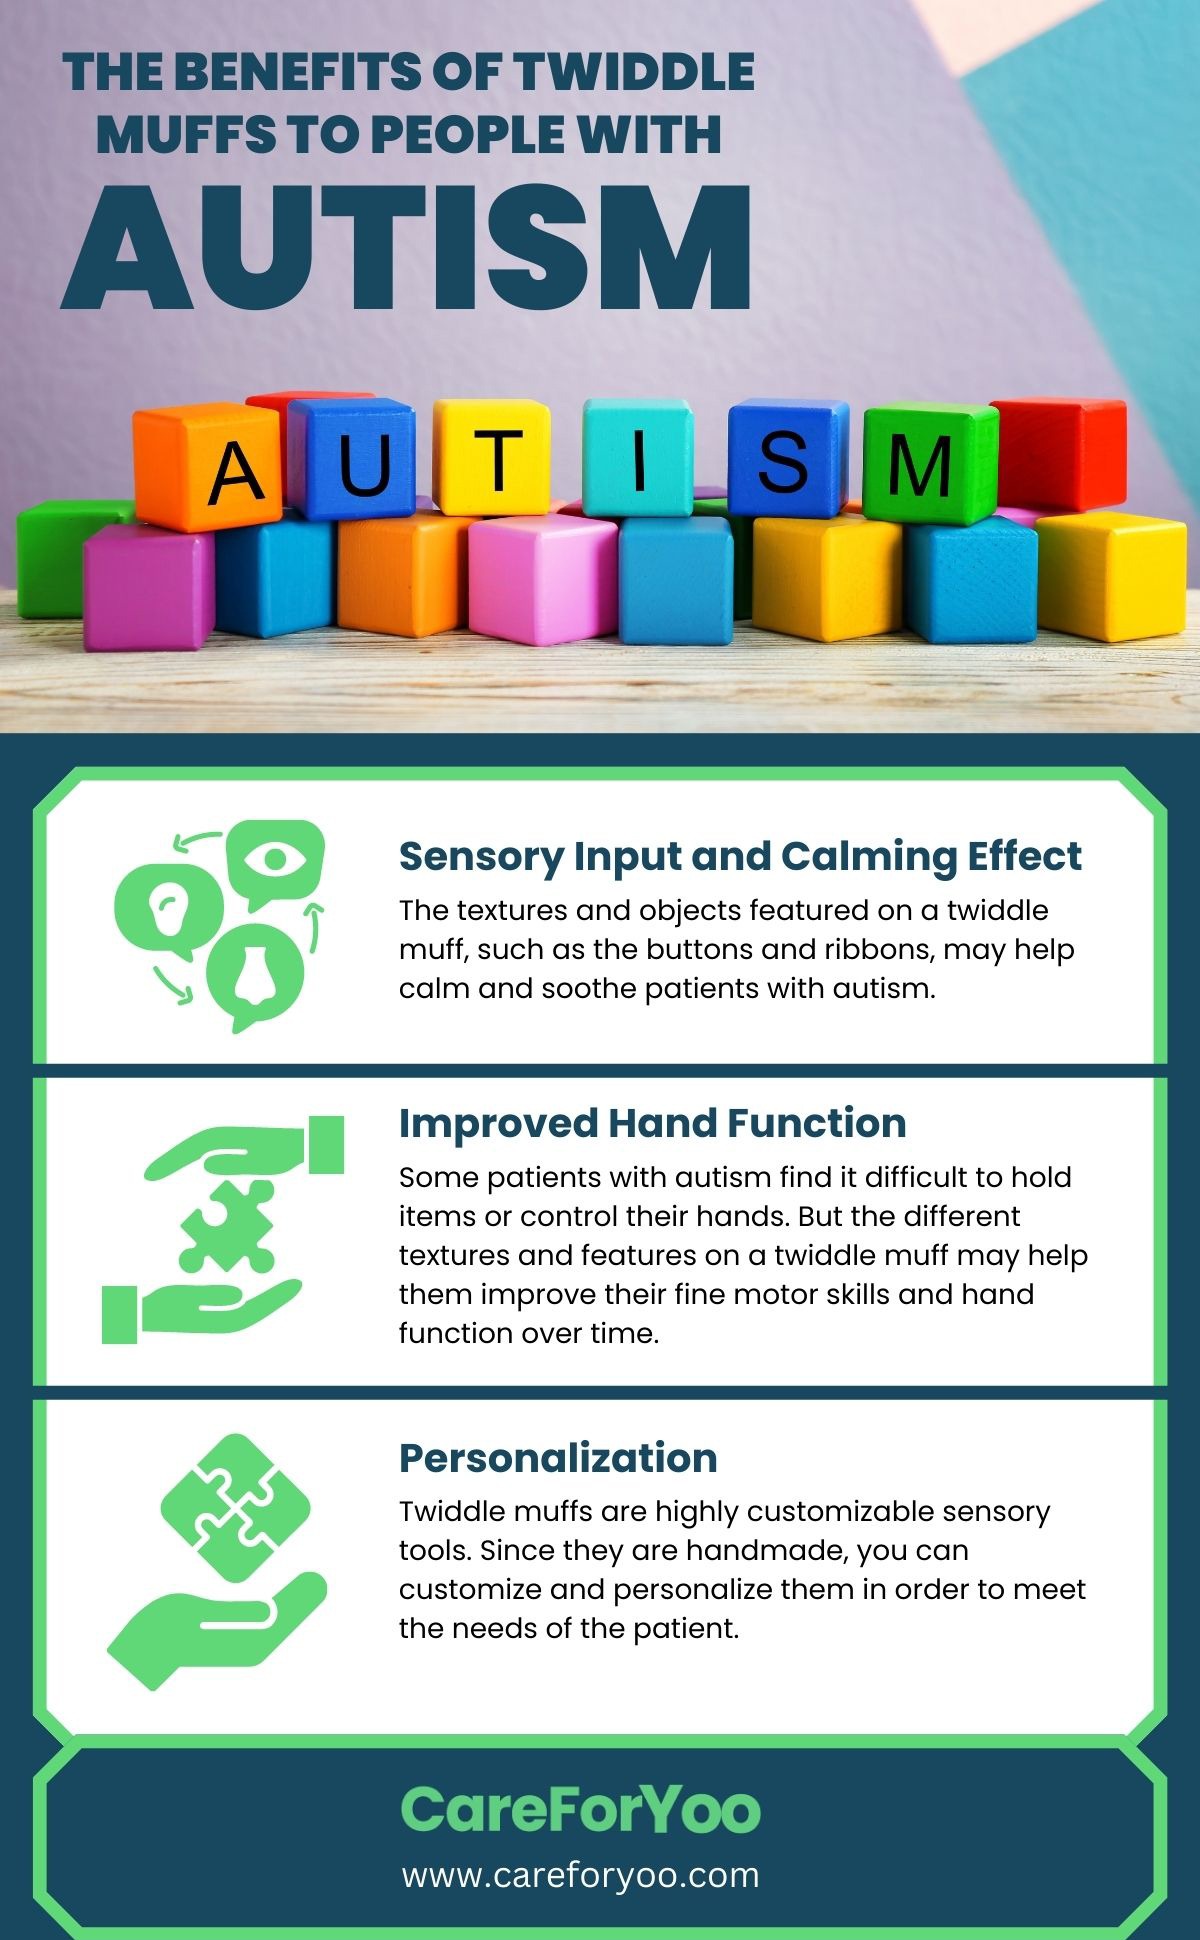 The Benefits of Twiddle Muffs to People with Autism